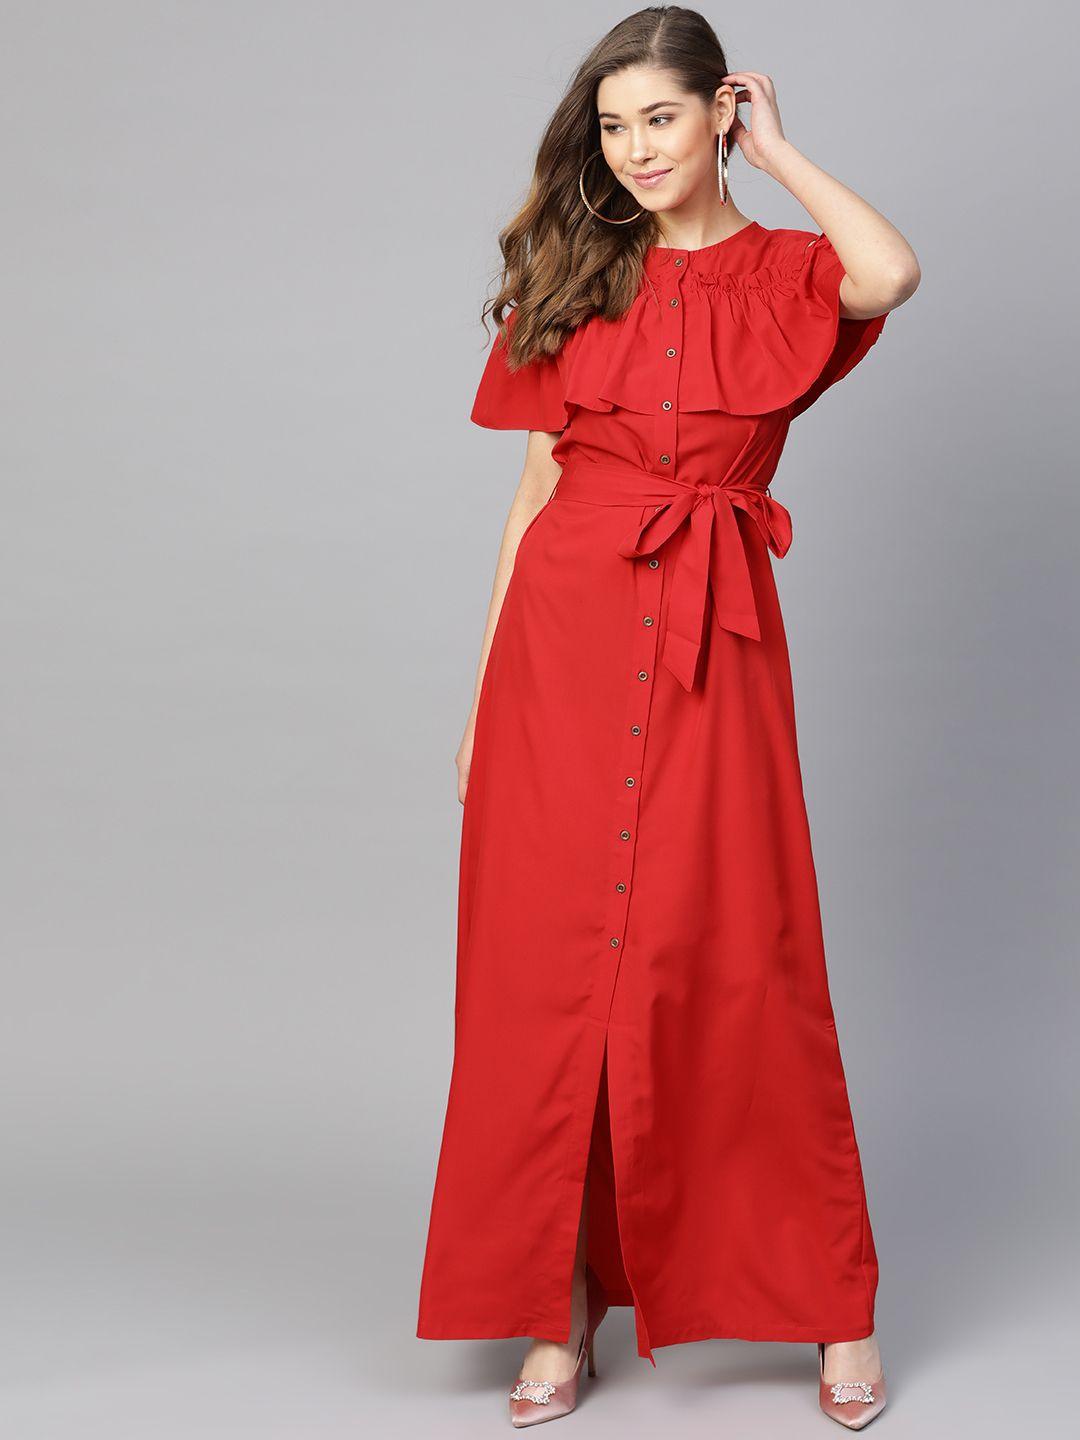 uptownie-lite-women-red-solid-ruffle-maxi-dress-with-cold-shoulder-sleeves